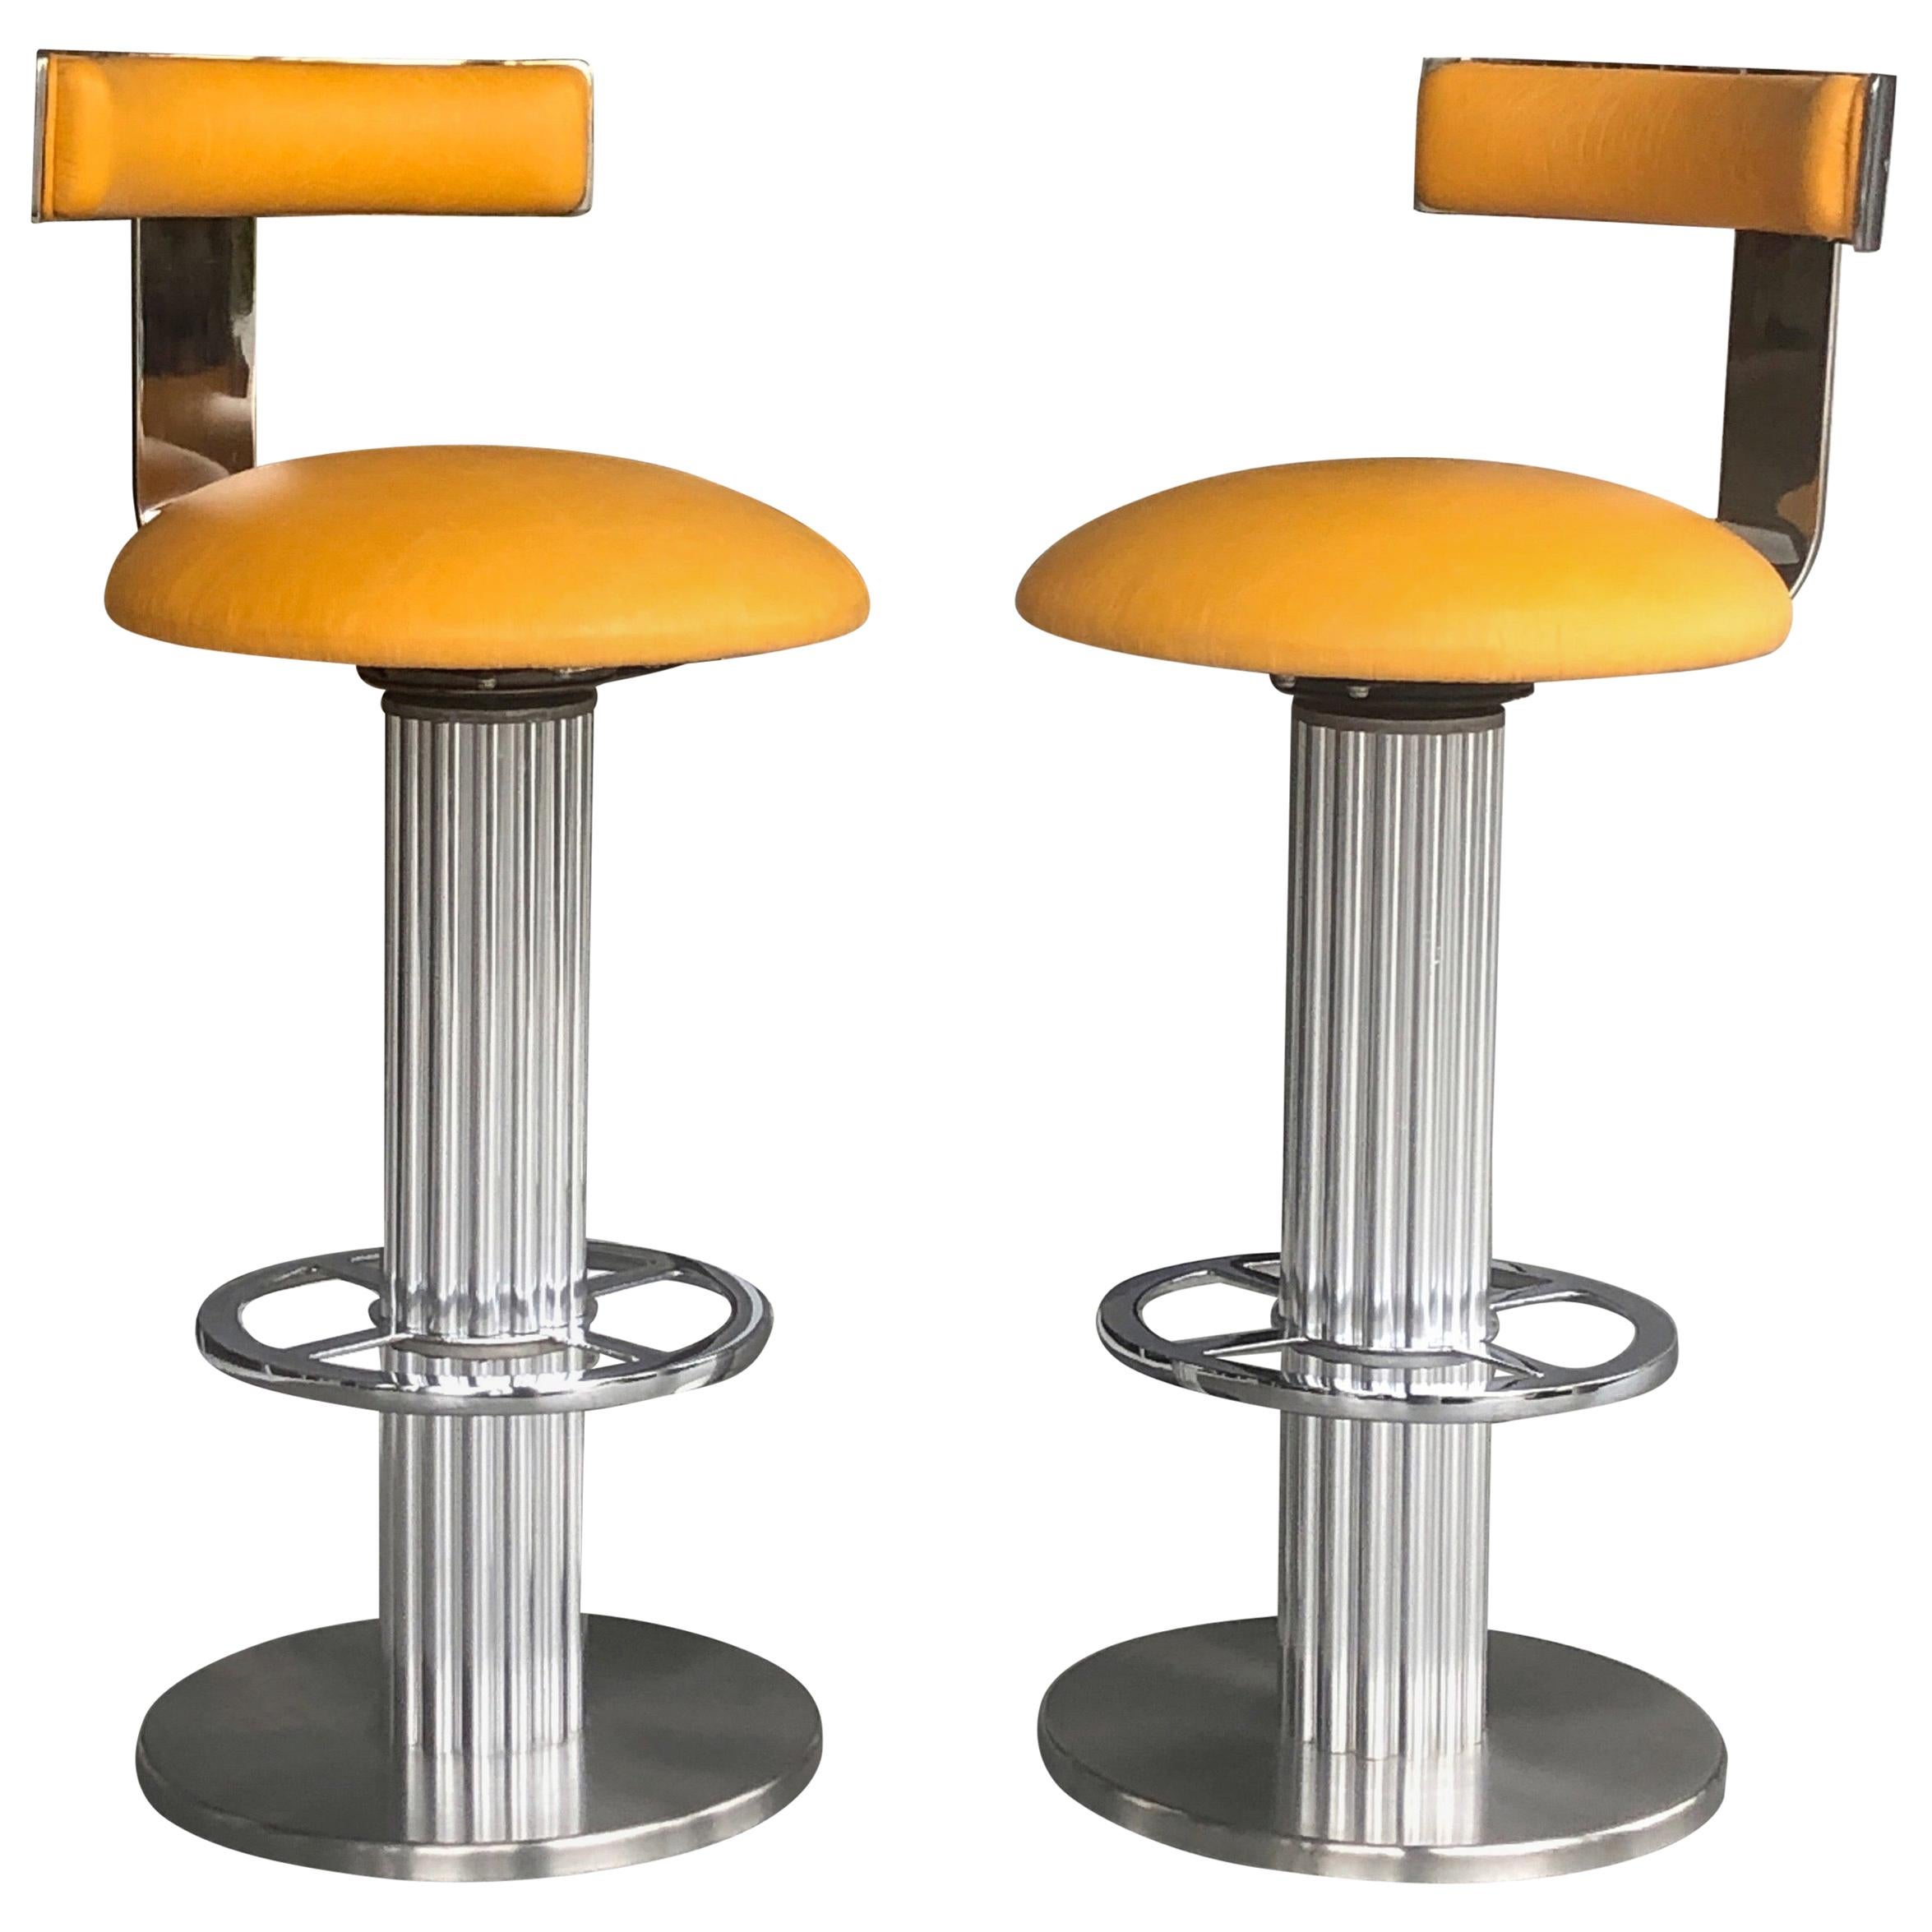 Design for Leisure Pair of Yellow Swivel Bar Stools, 1980s